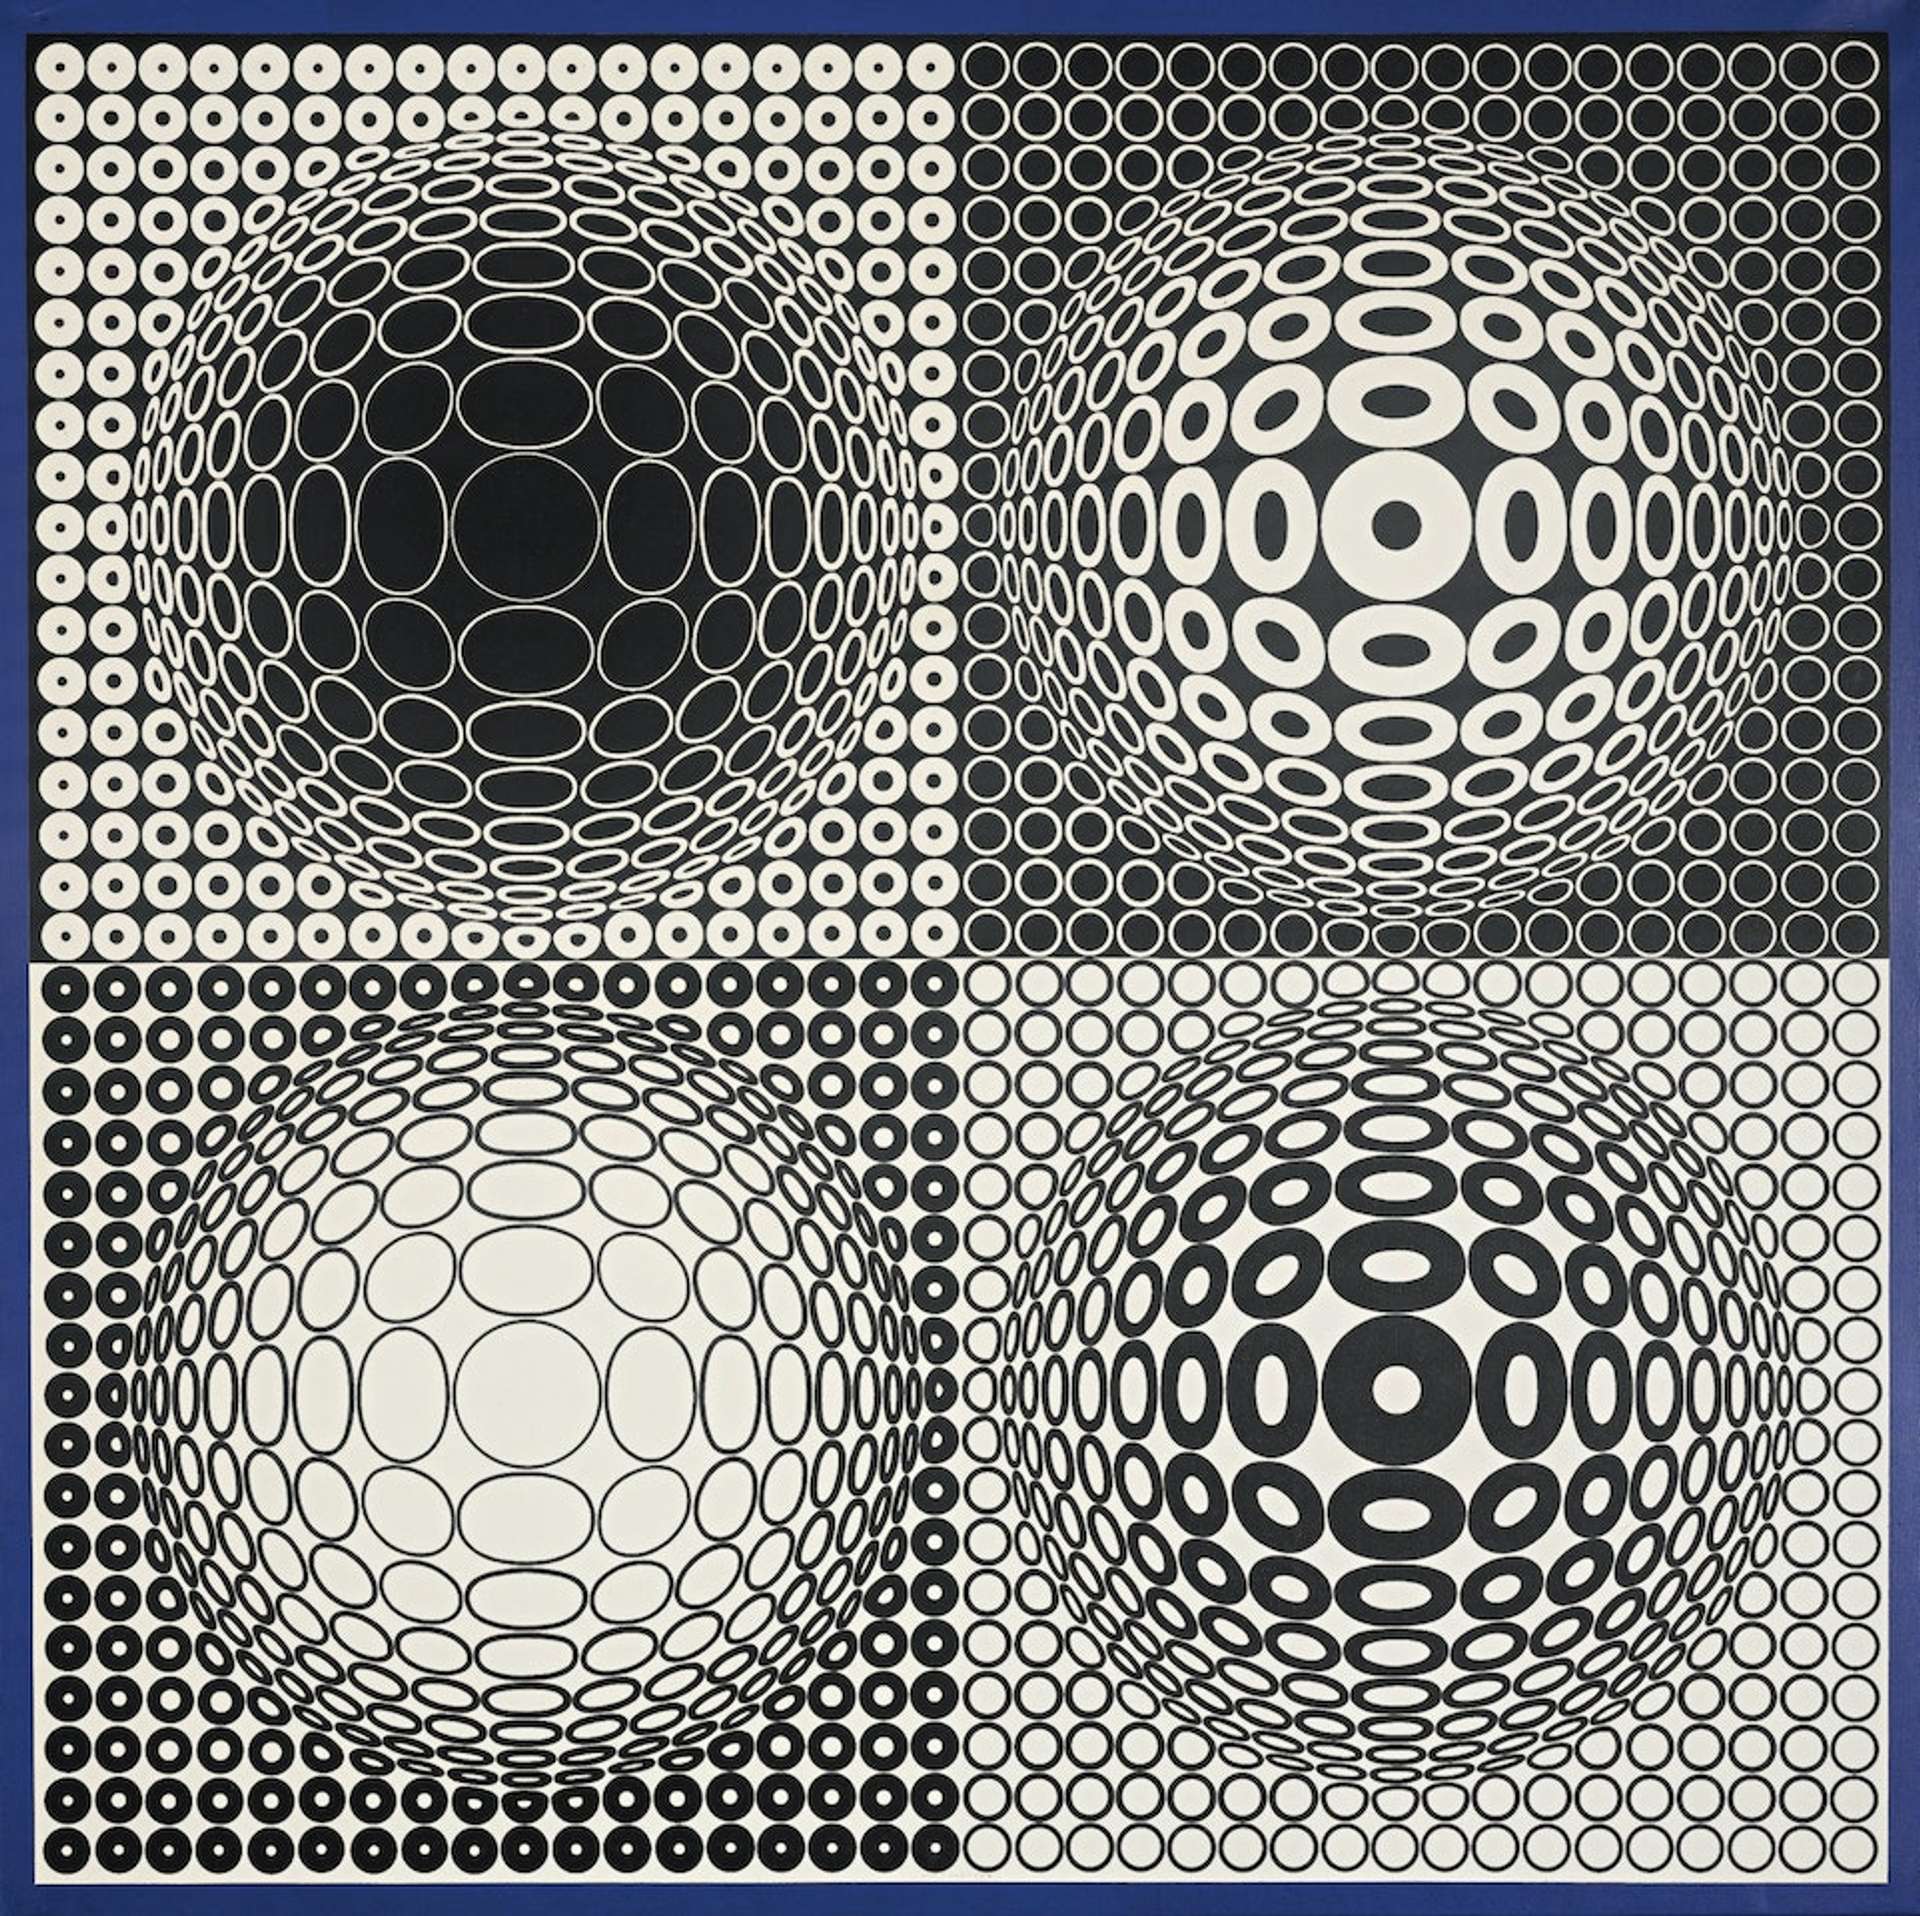 A square canvas divided into four equal sections, each adorned with repeating circles in various shades of black and white. Within each circle, smaller protruding circles enhance the optical effect of the composition.